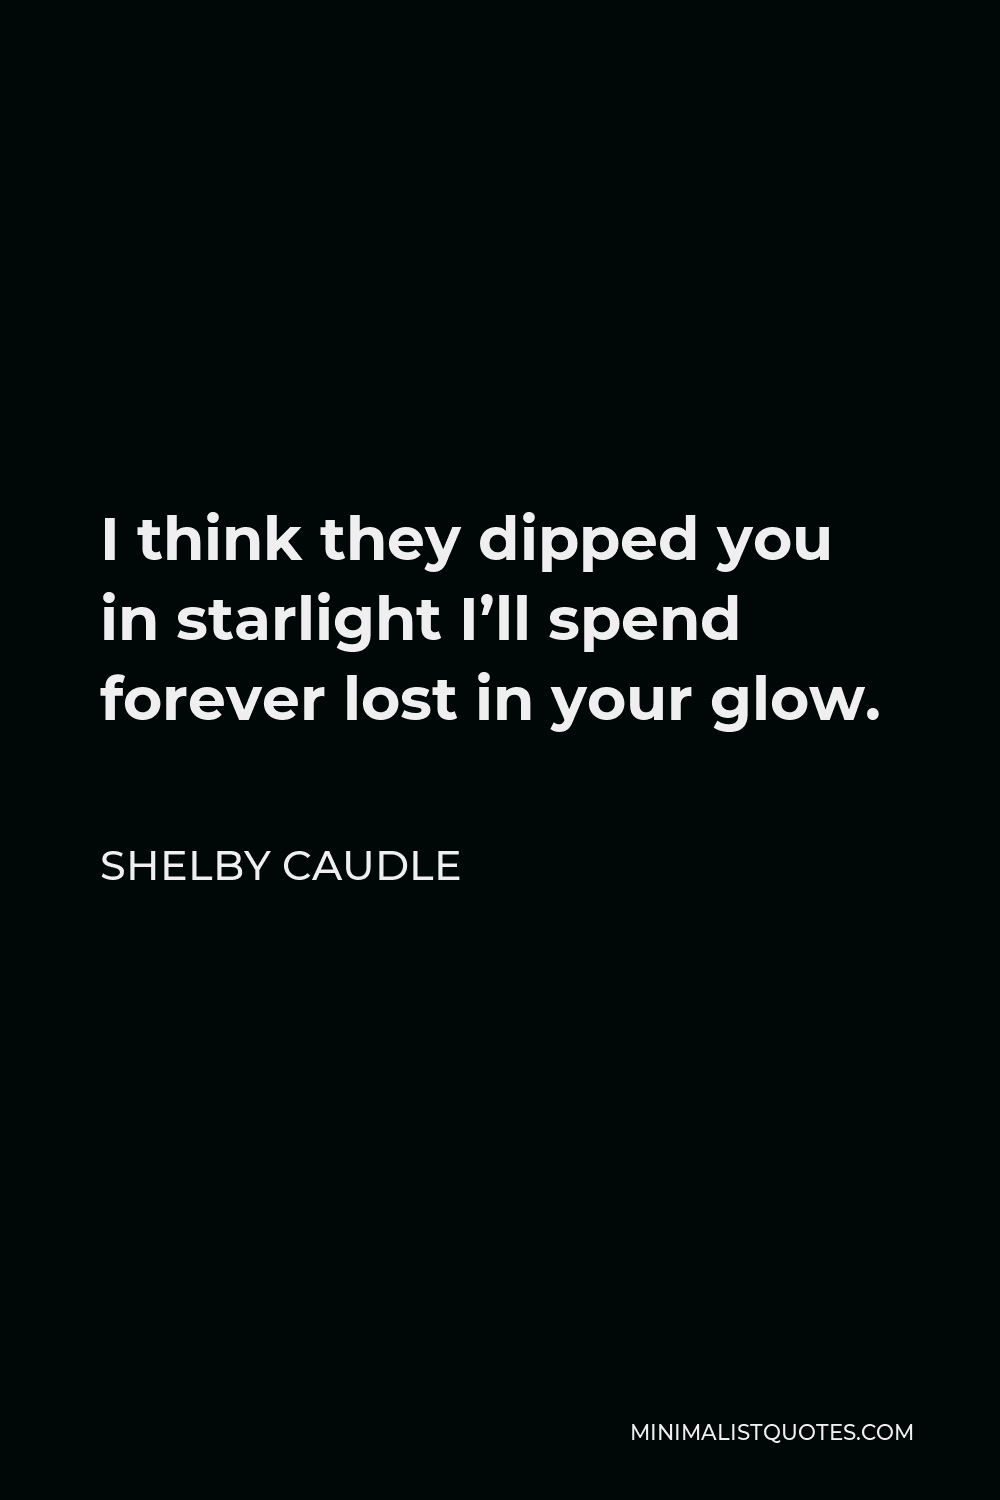 Shelby Caudle Quote - I think they dipped you in starlight I’ll spend forever lost in your glow.